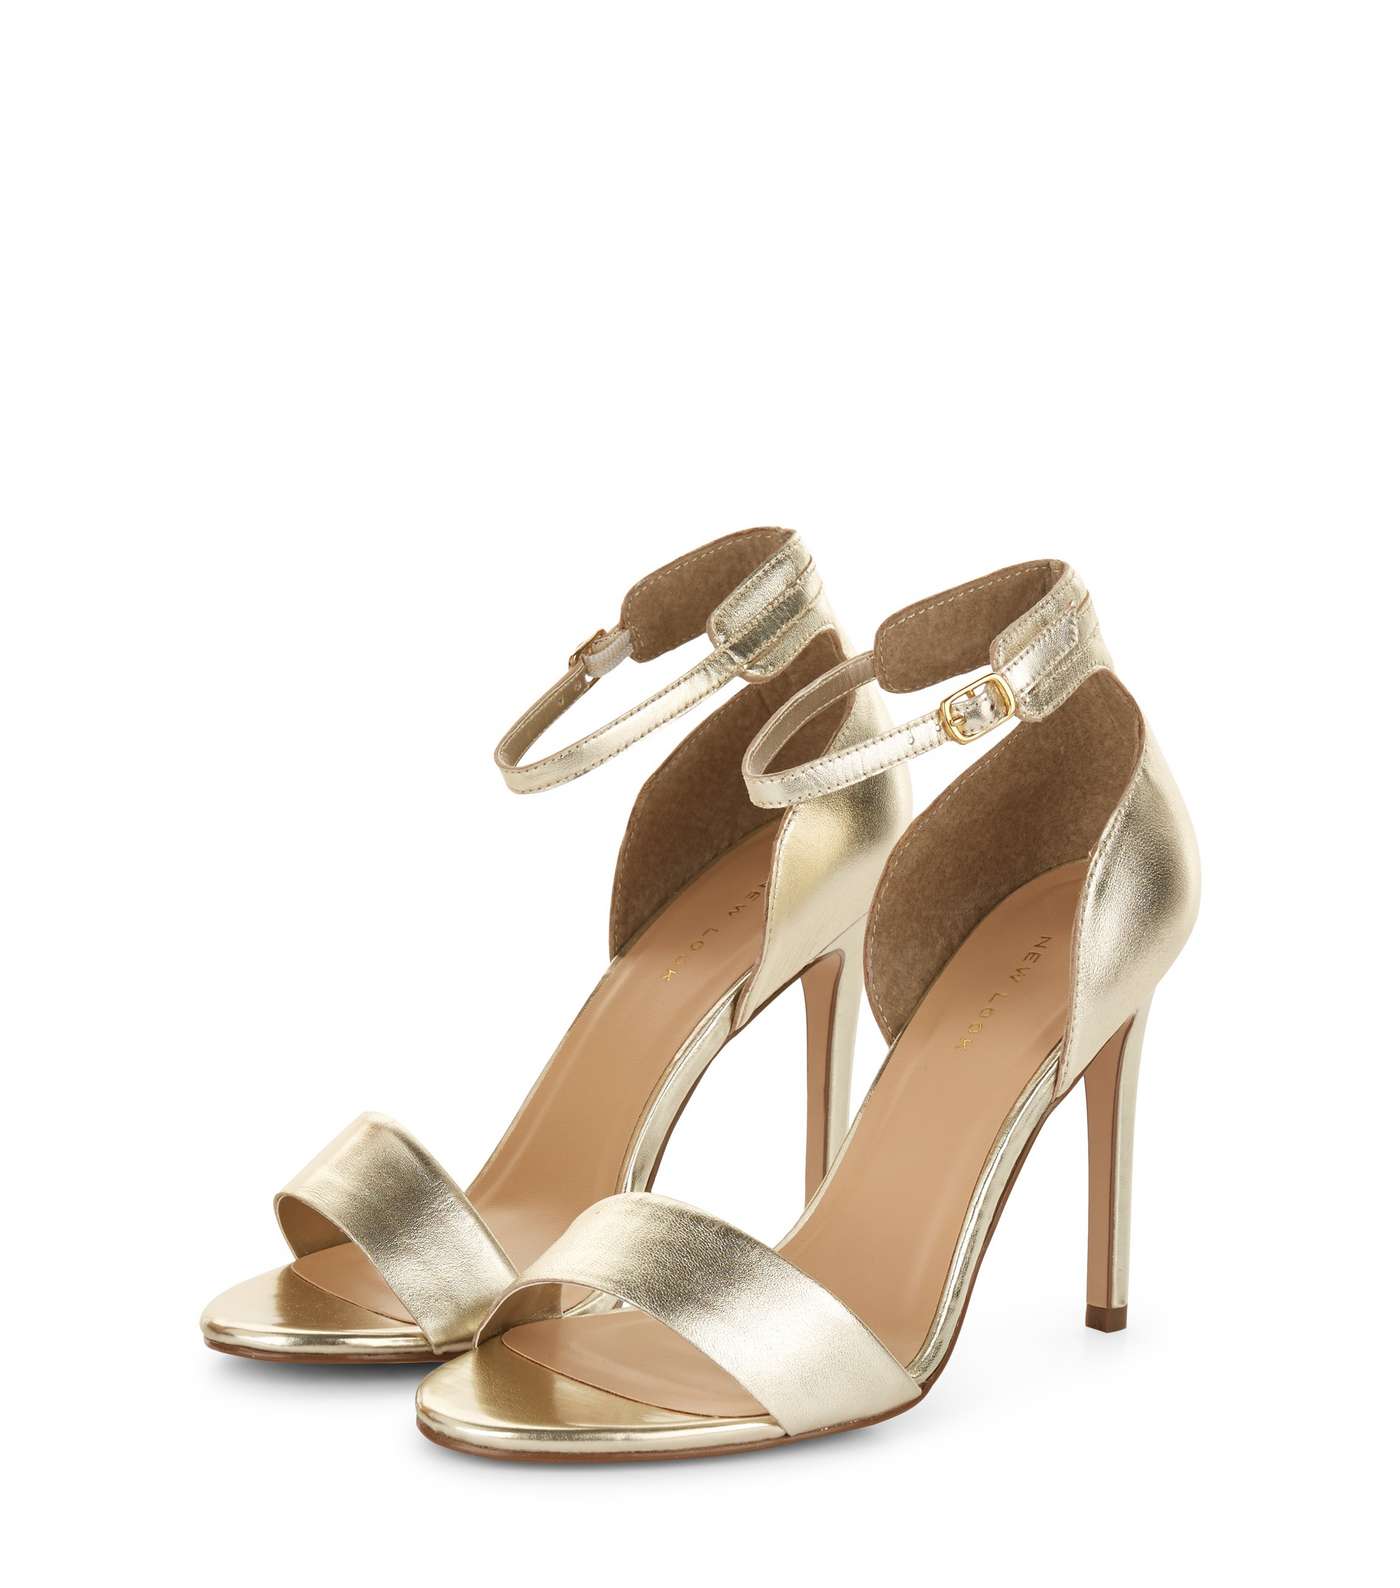 Gold Metallic Leather Ankle Strap Heels Image 3